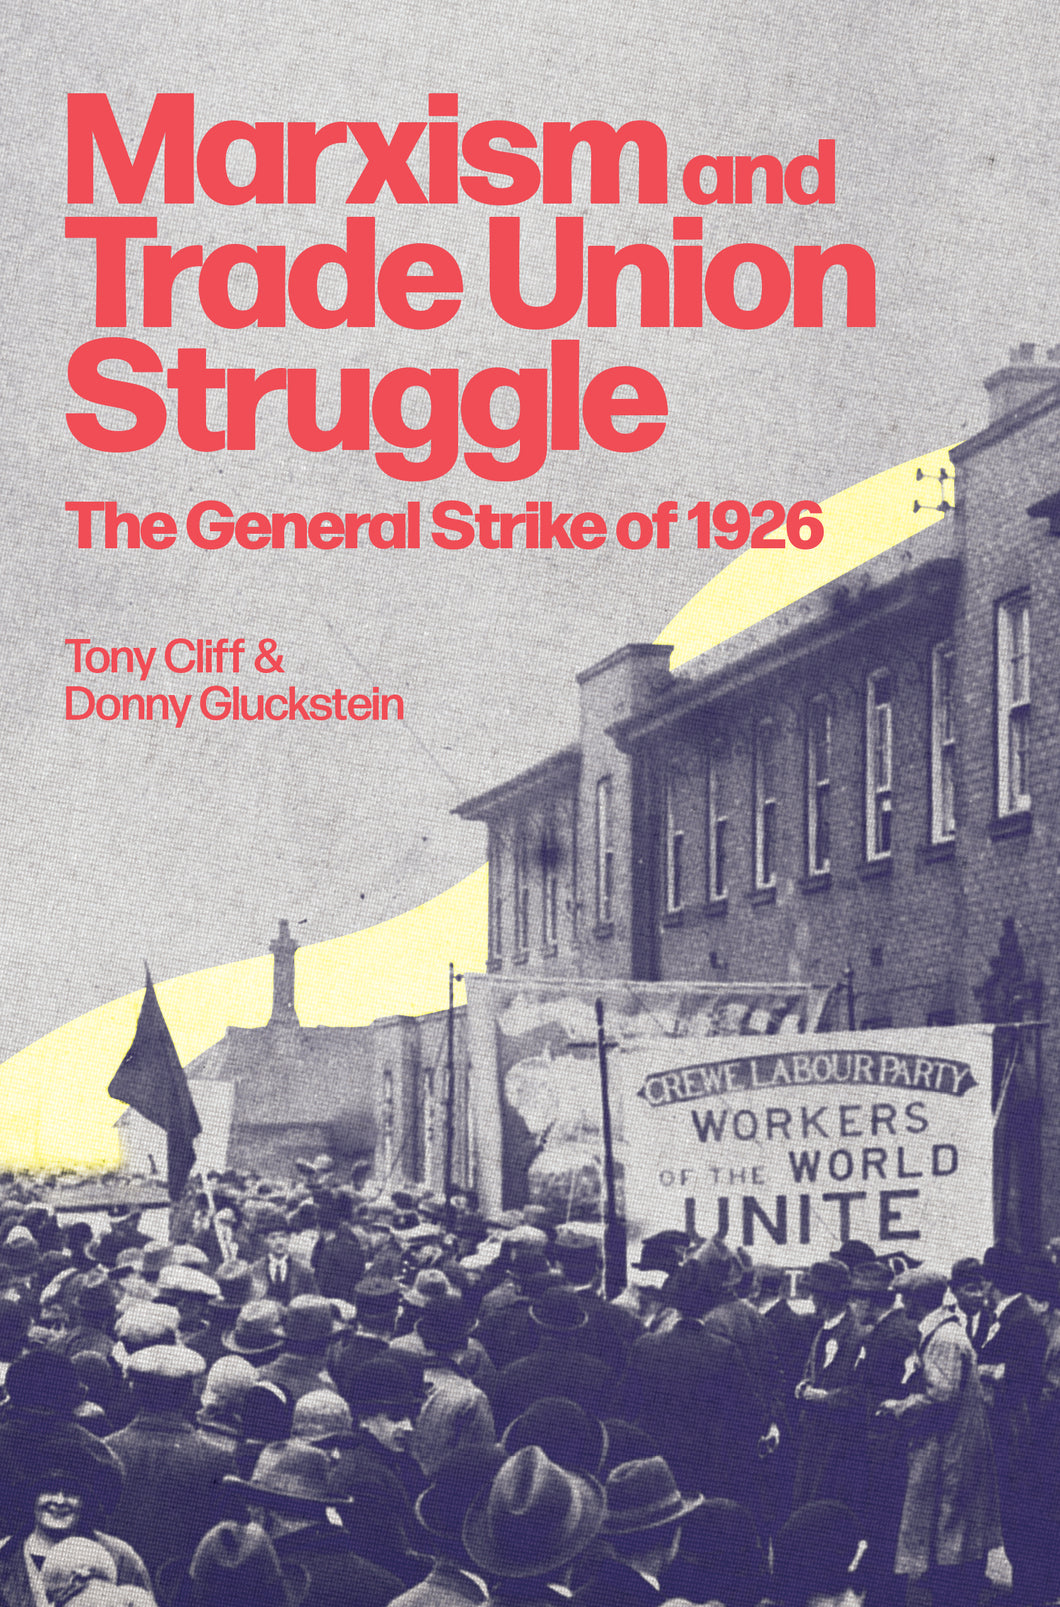 Marxism and Trade Union Struggle: The General Strike of 1926